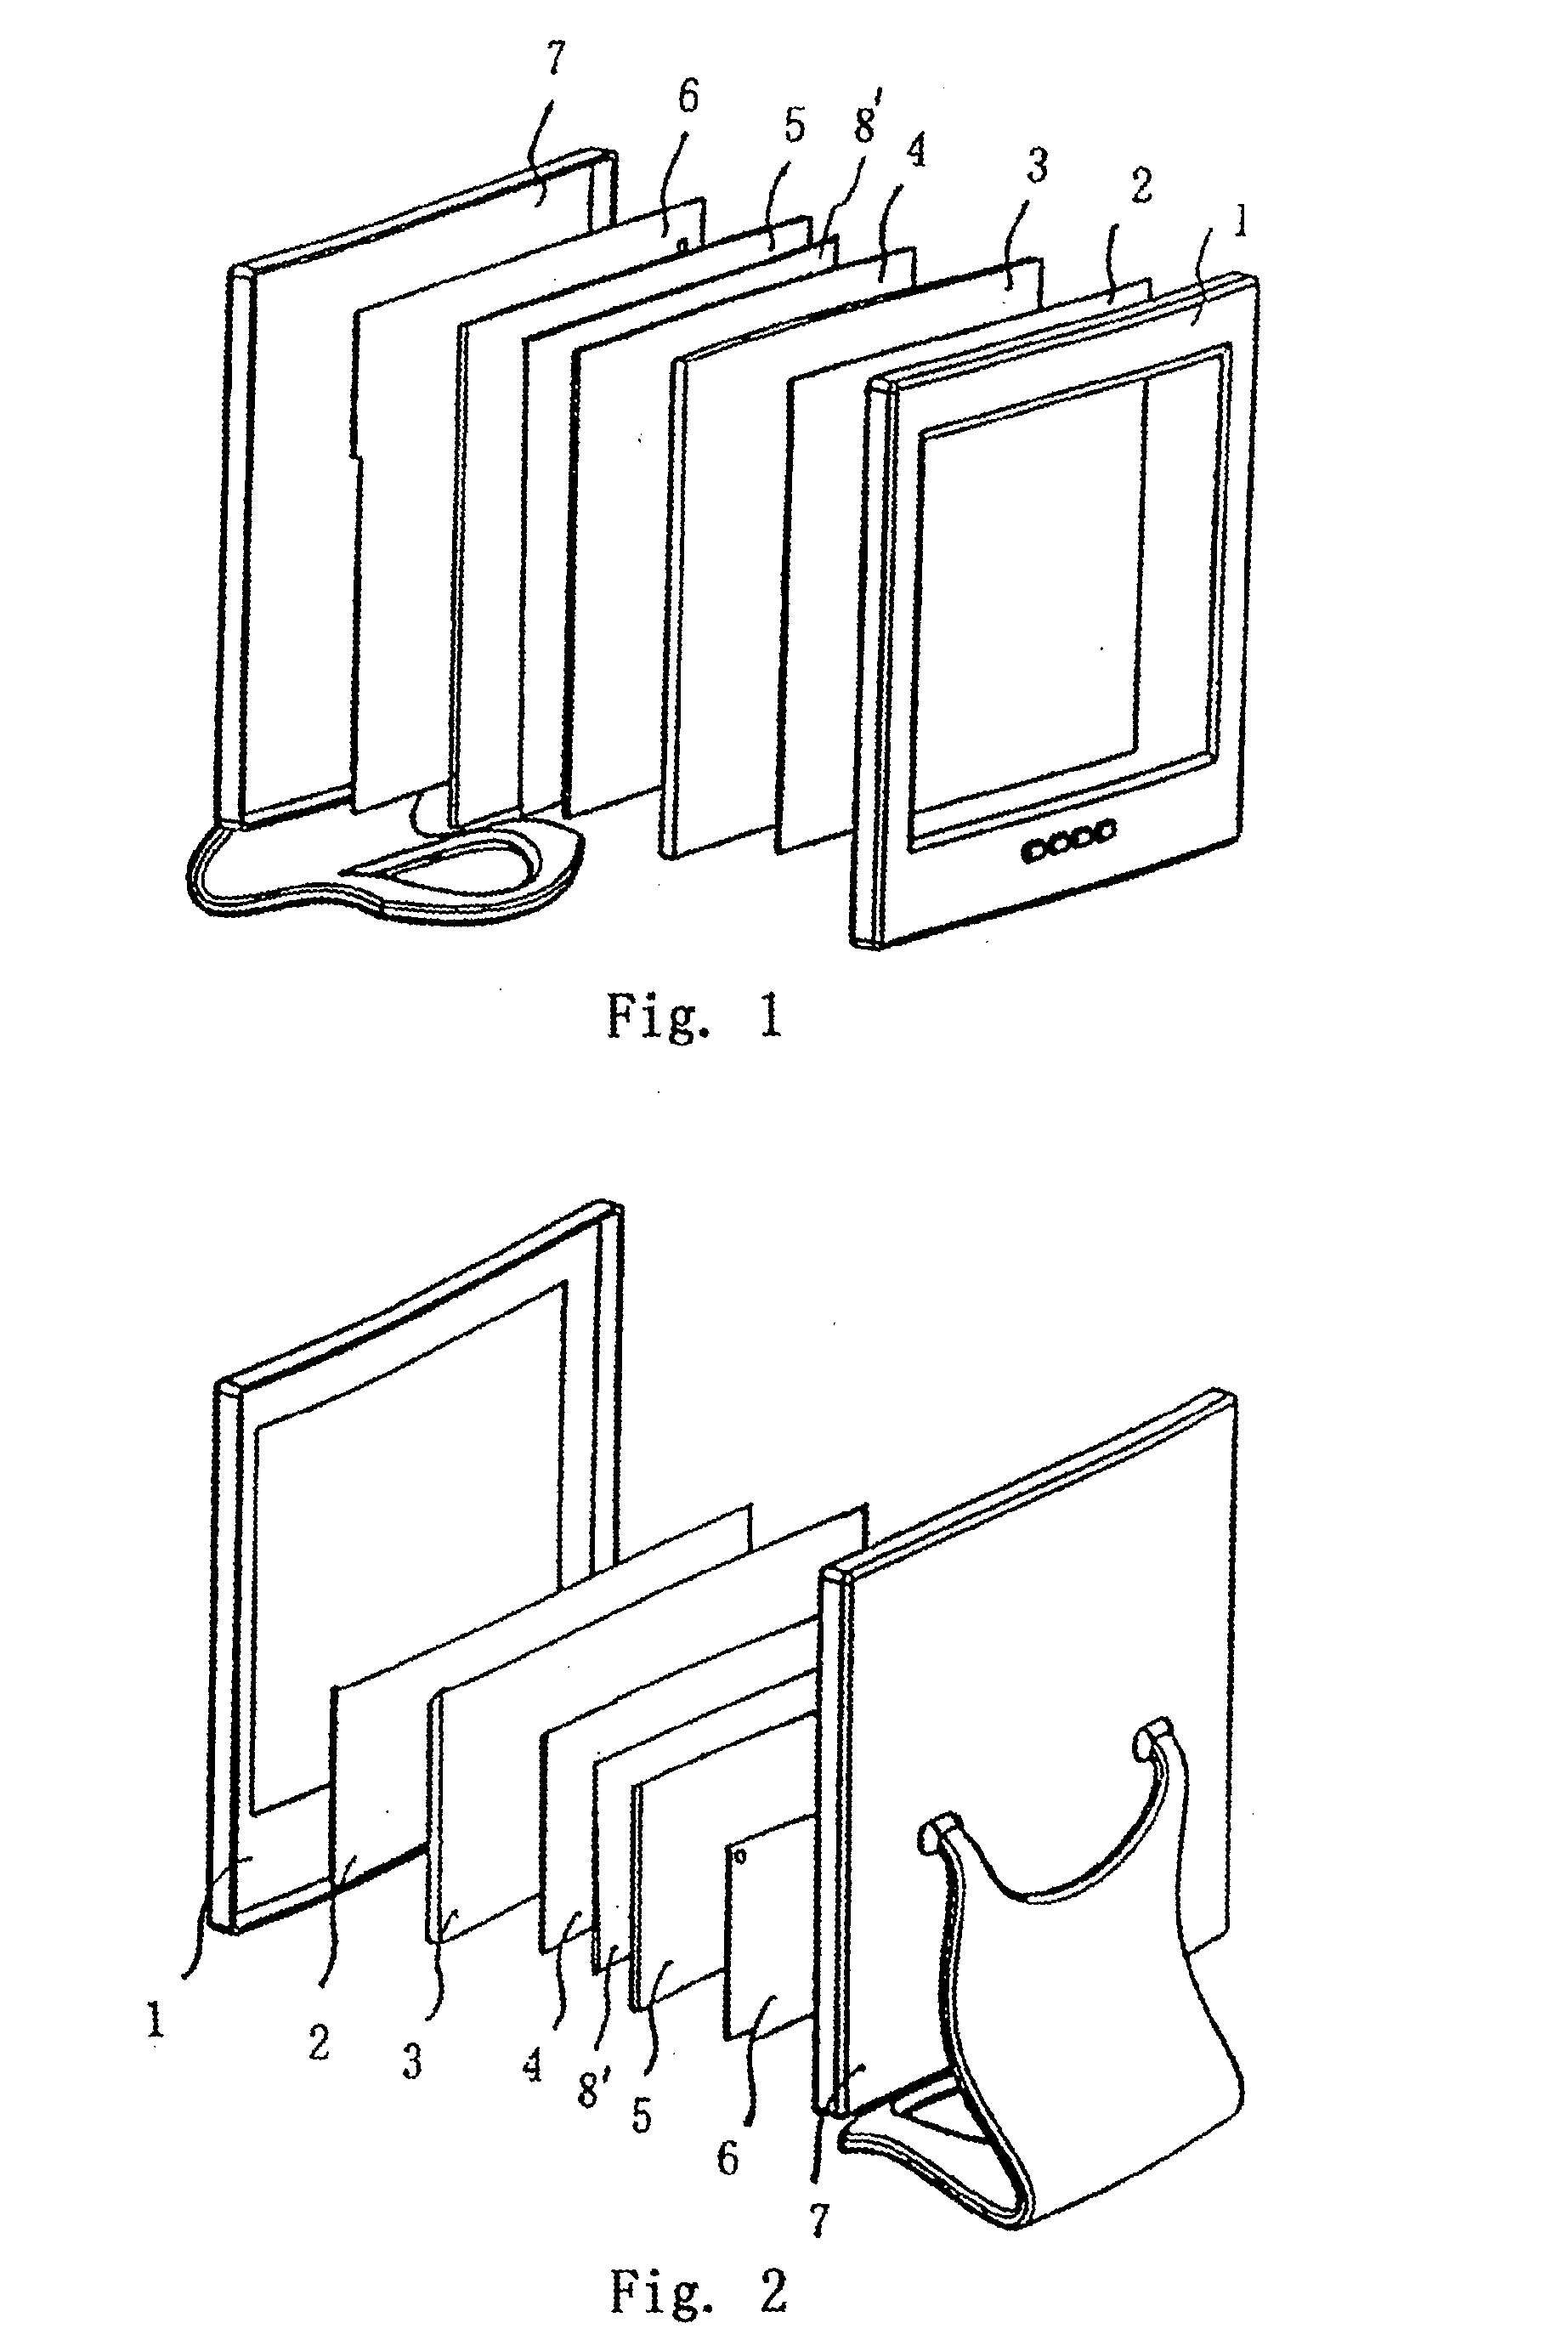 Touch control display screen apparatus with a built-in electromagnetic induction layer of wire lattice